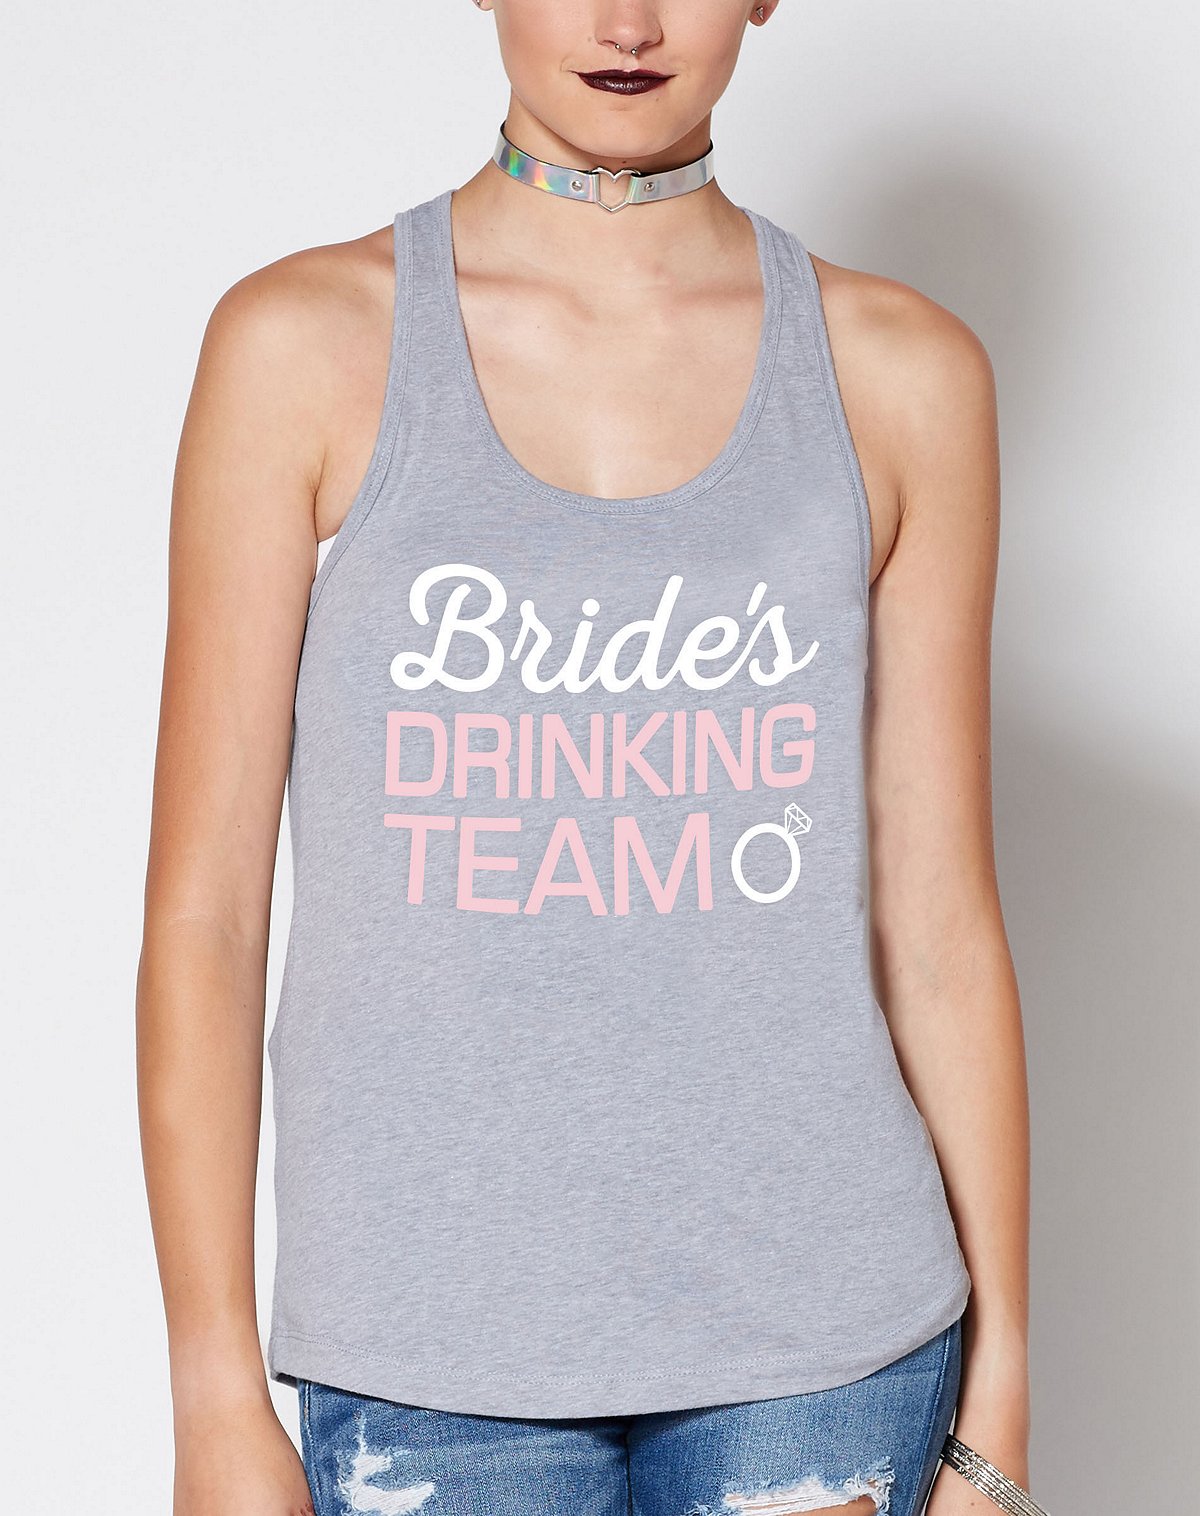 bride's drinking team tank top bachelorette party